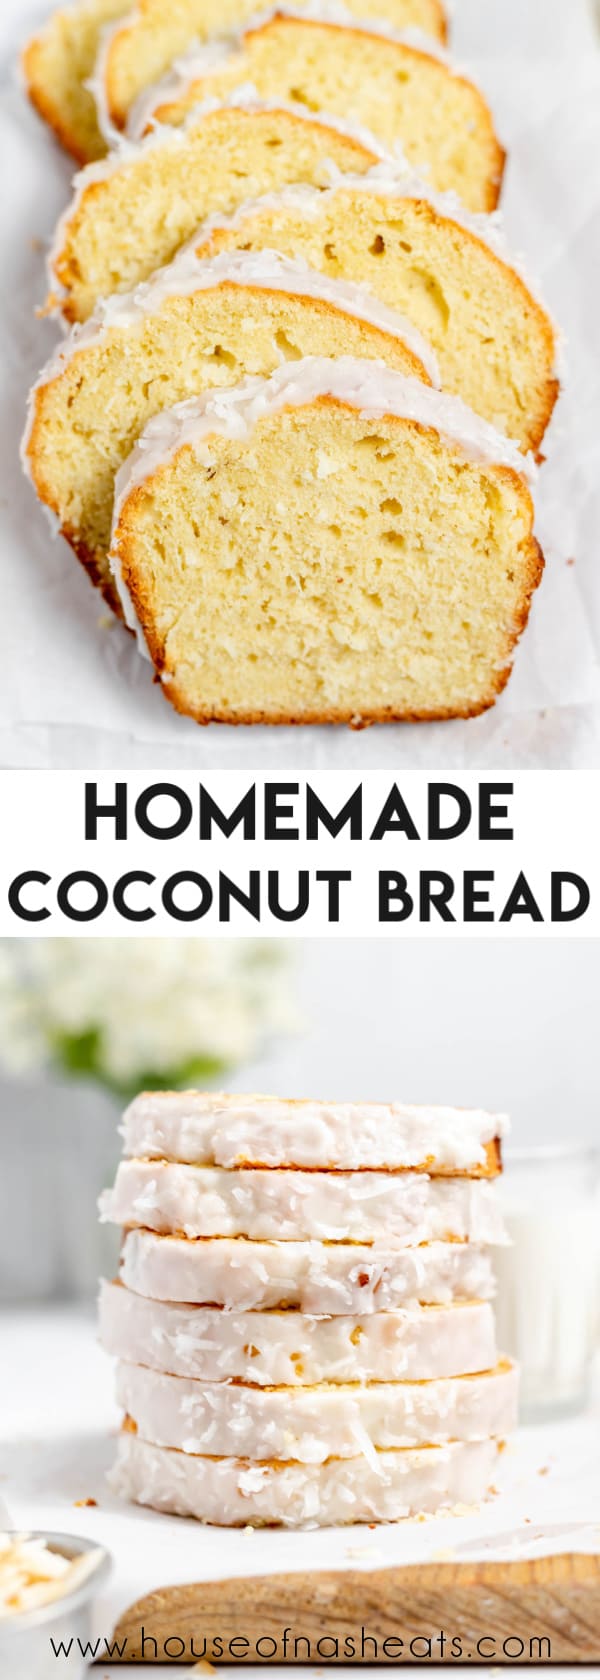 A collage of images of coconut bread with text overlay.